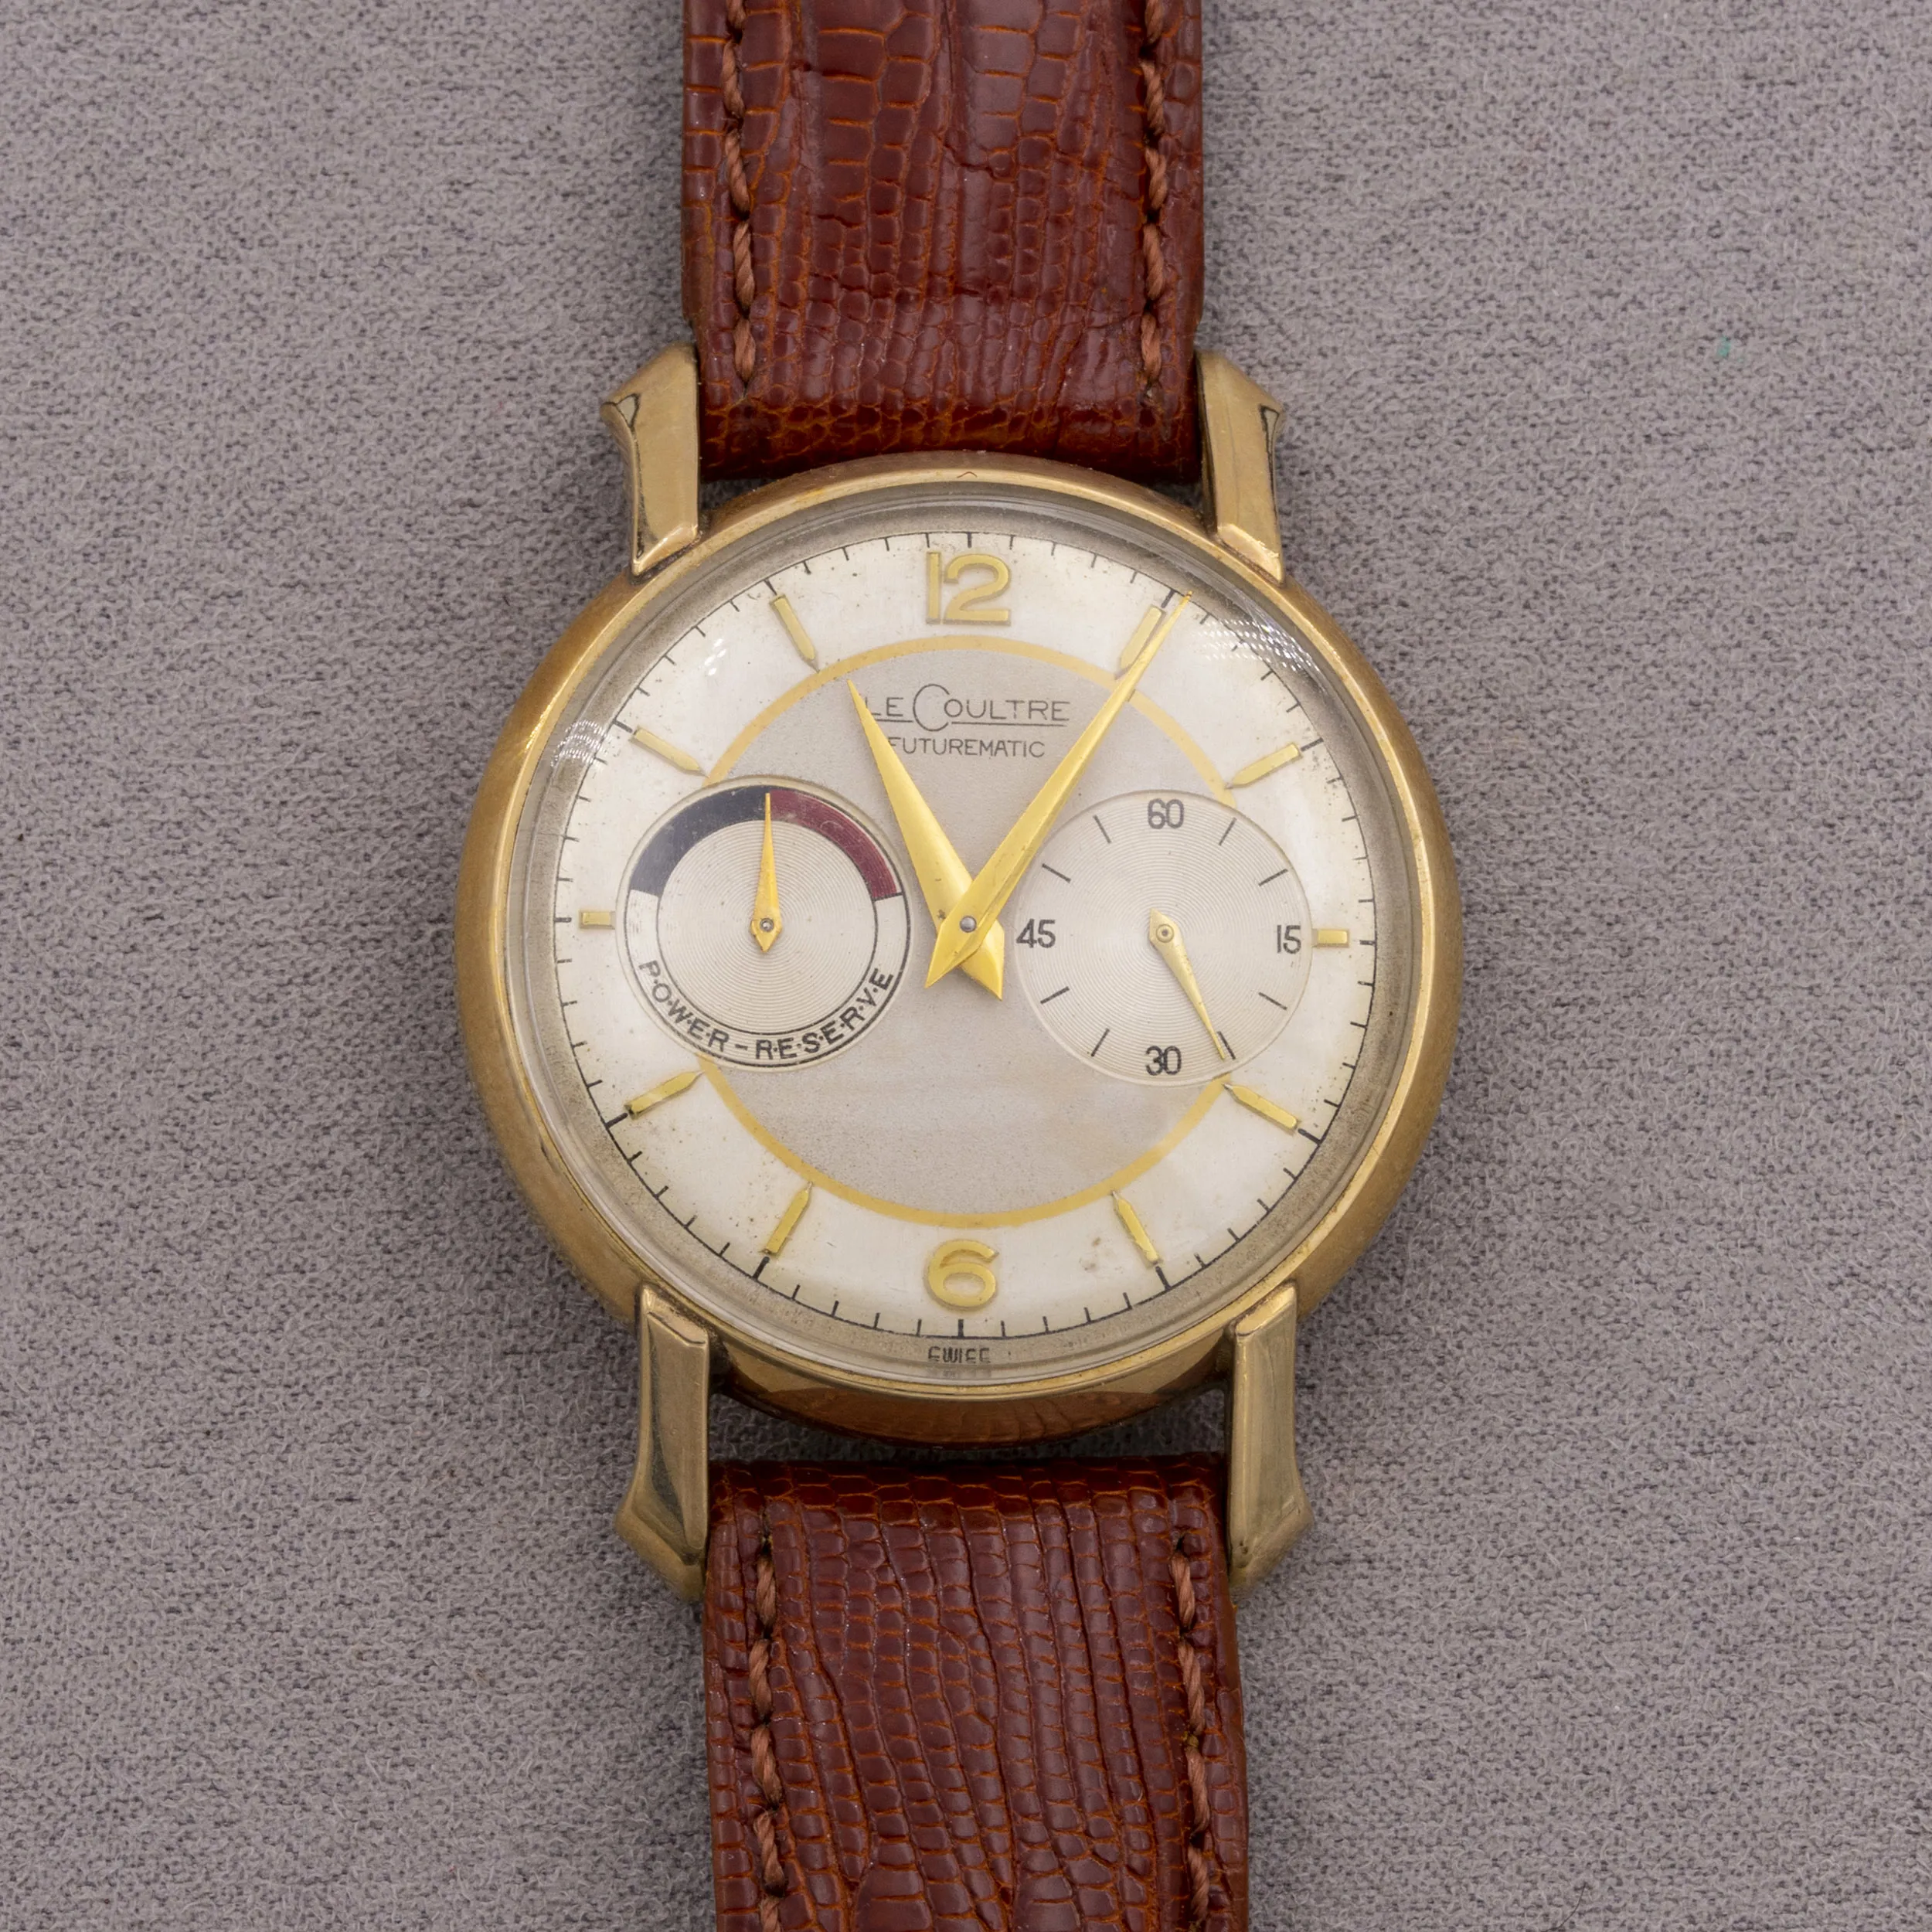 Jaeger-LeCoultre Futurematic 34mm Yellow gold Silver